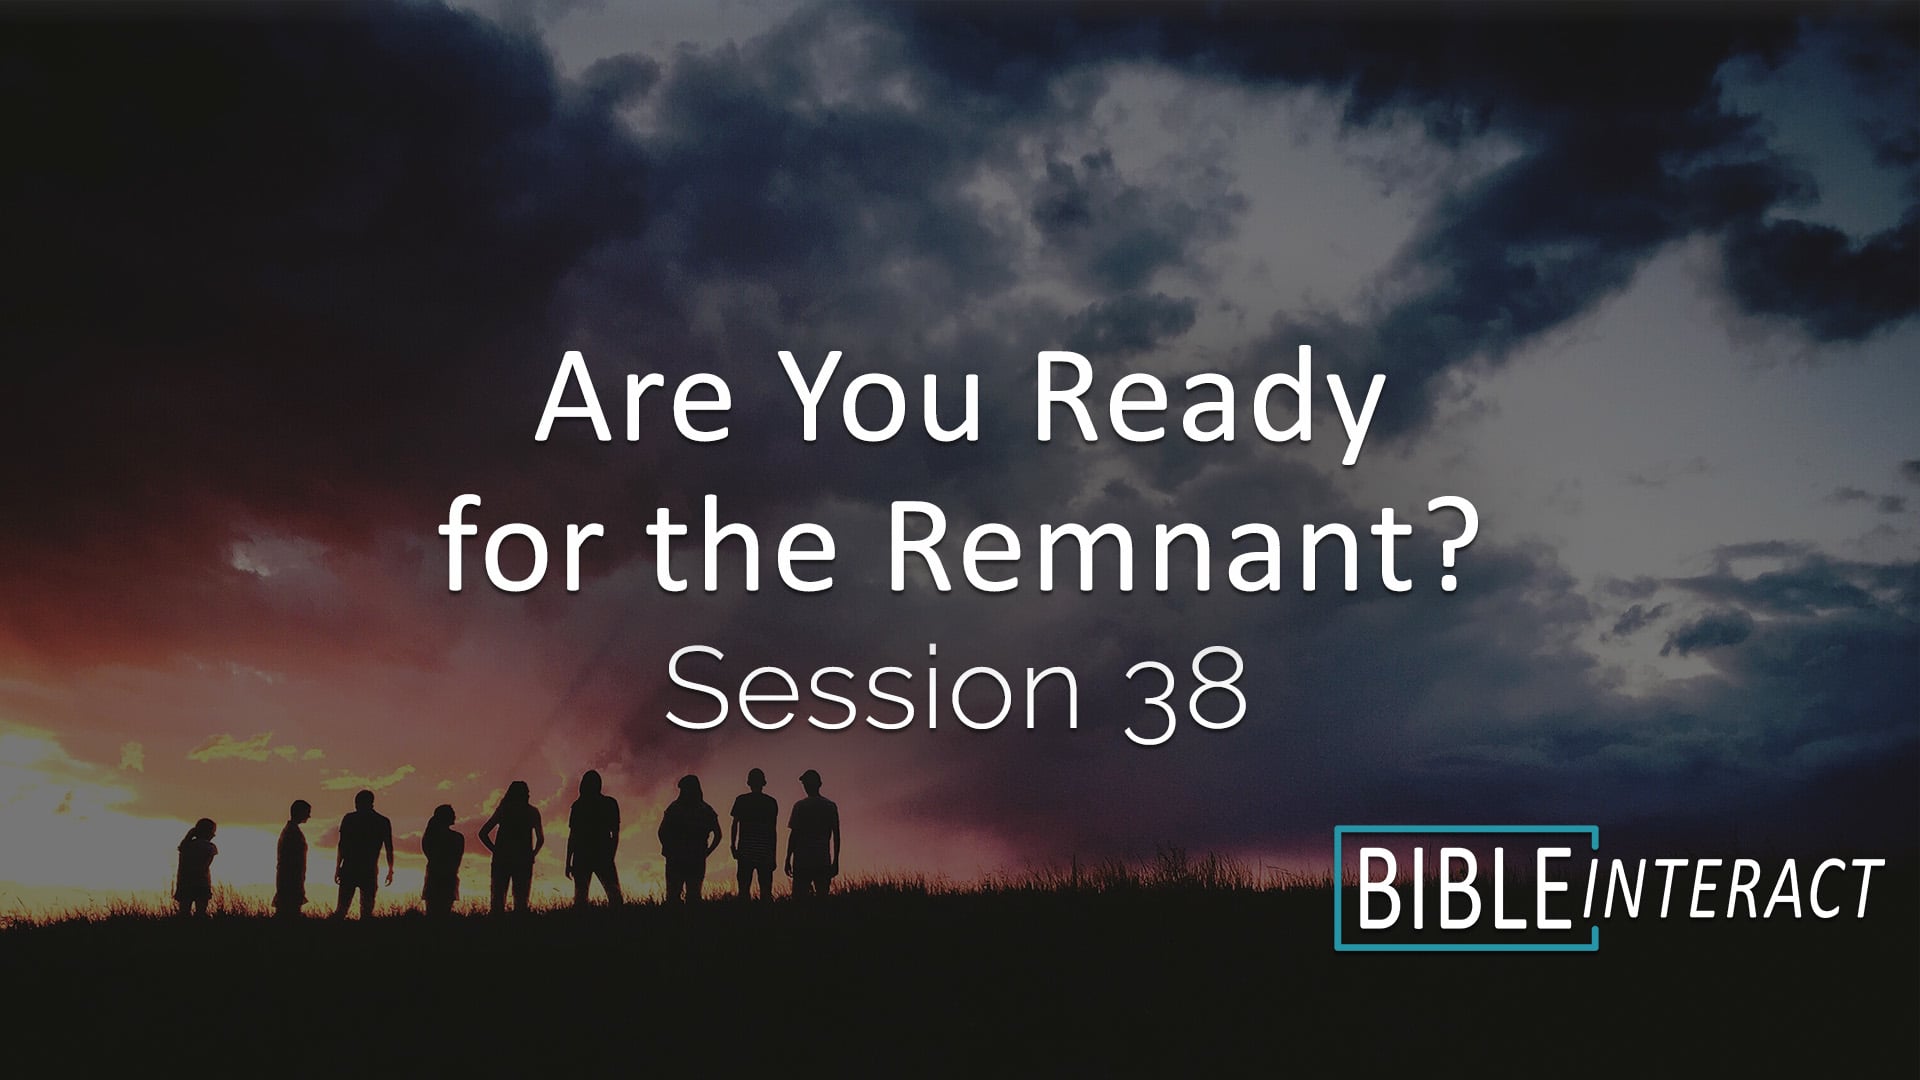 Are You Ready for the Remnant Session 38